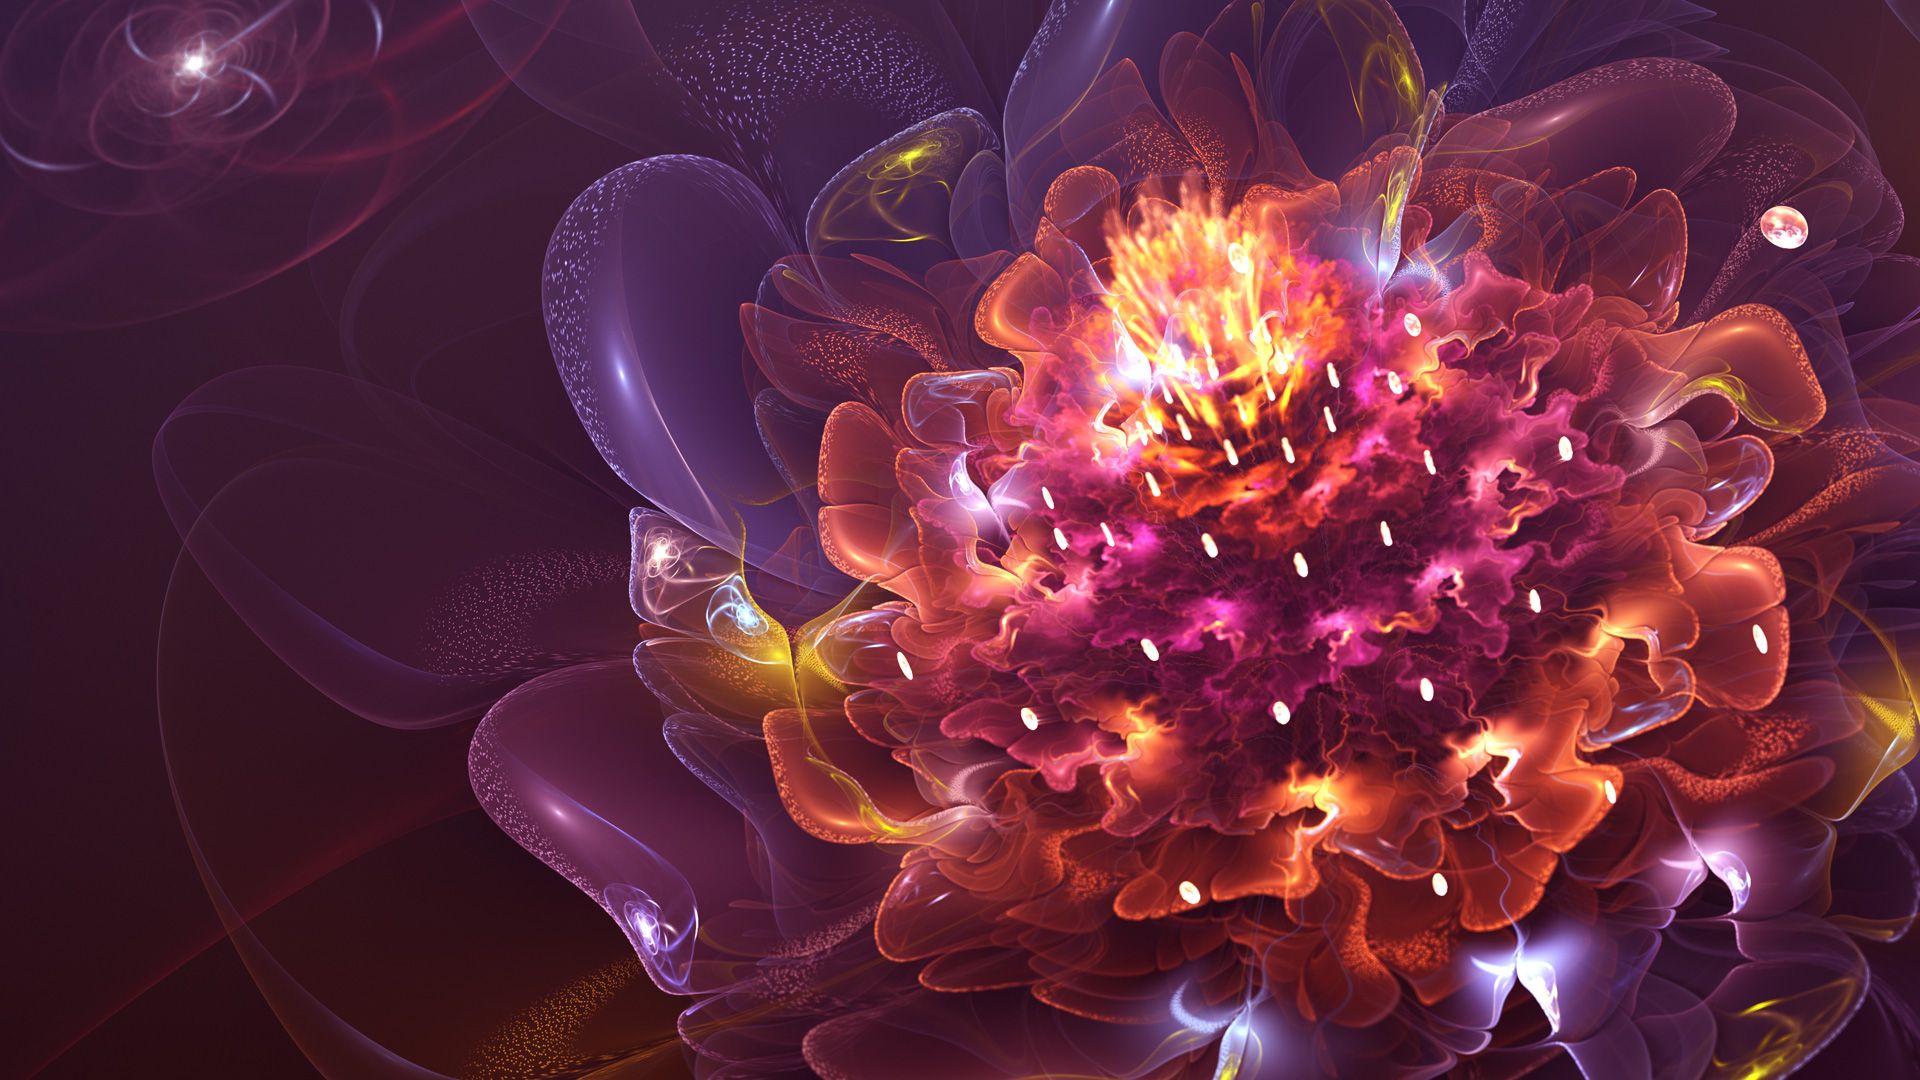 3D Abstract Flower 4K Wallpapers  HD Wallpapers  ID 19169